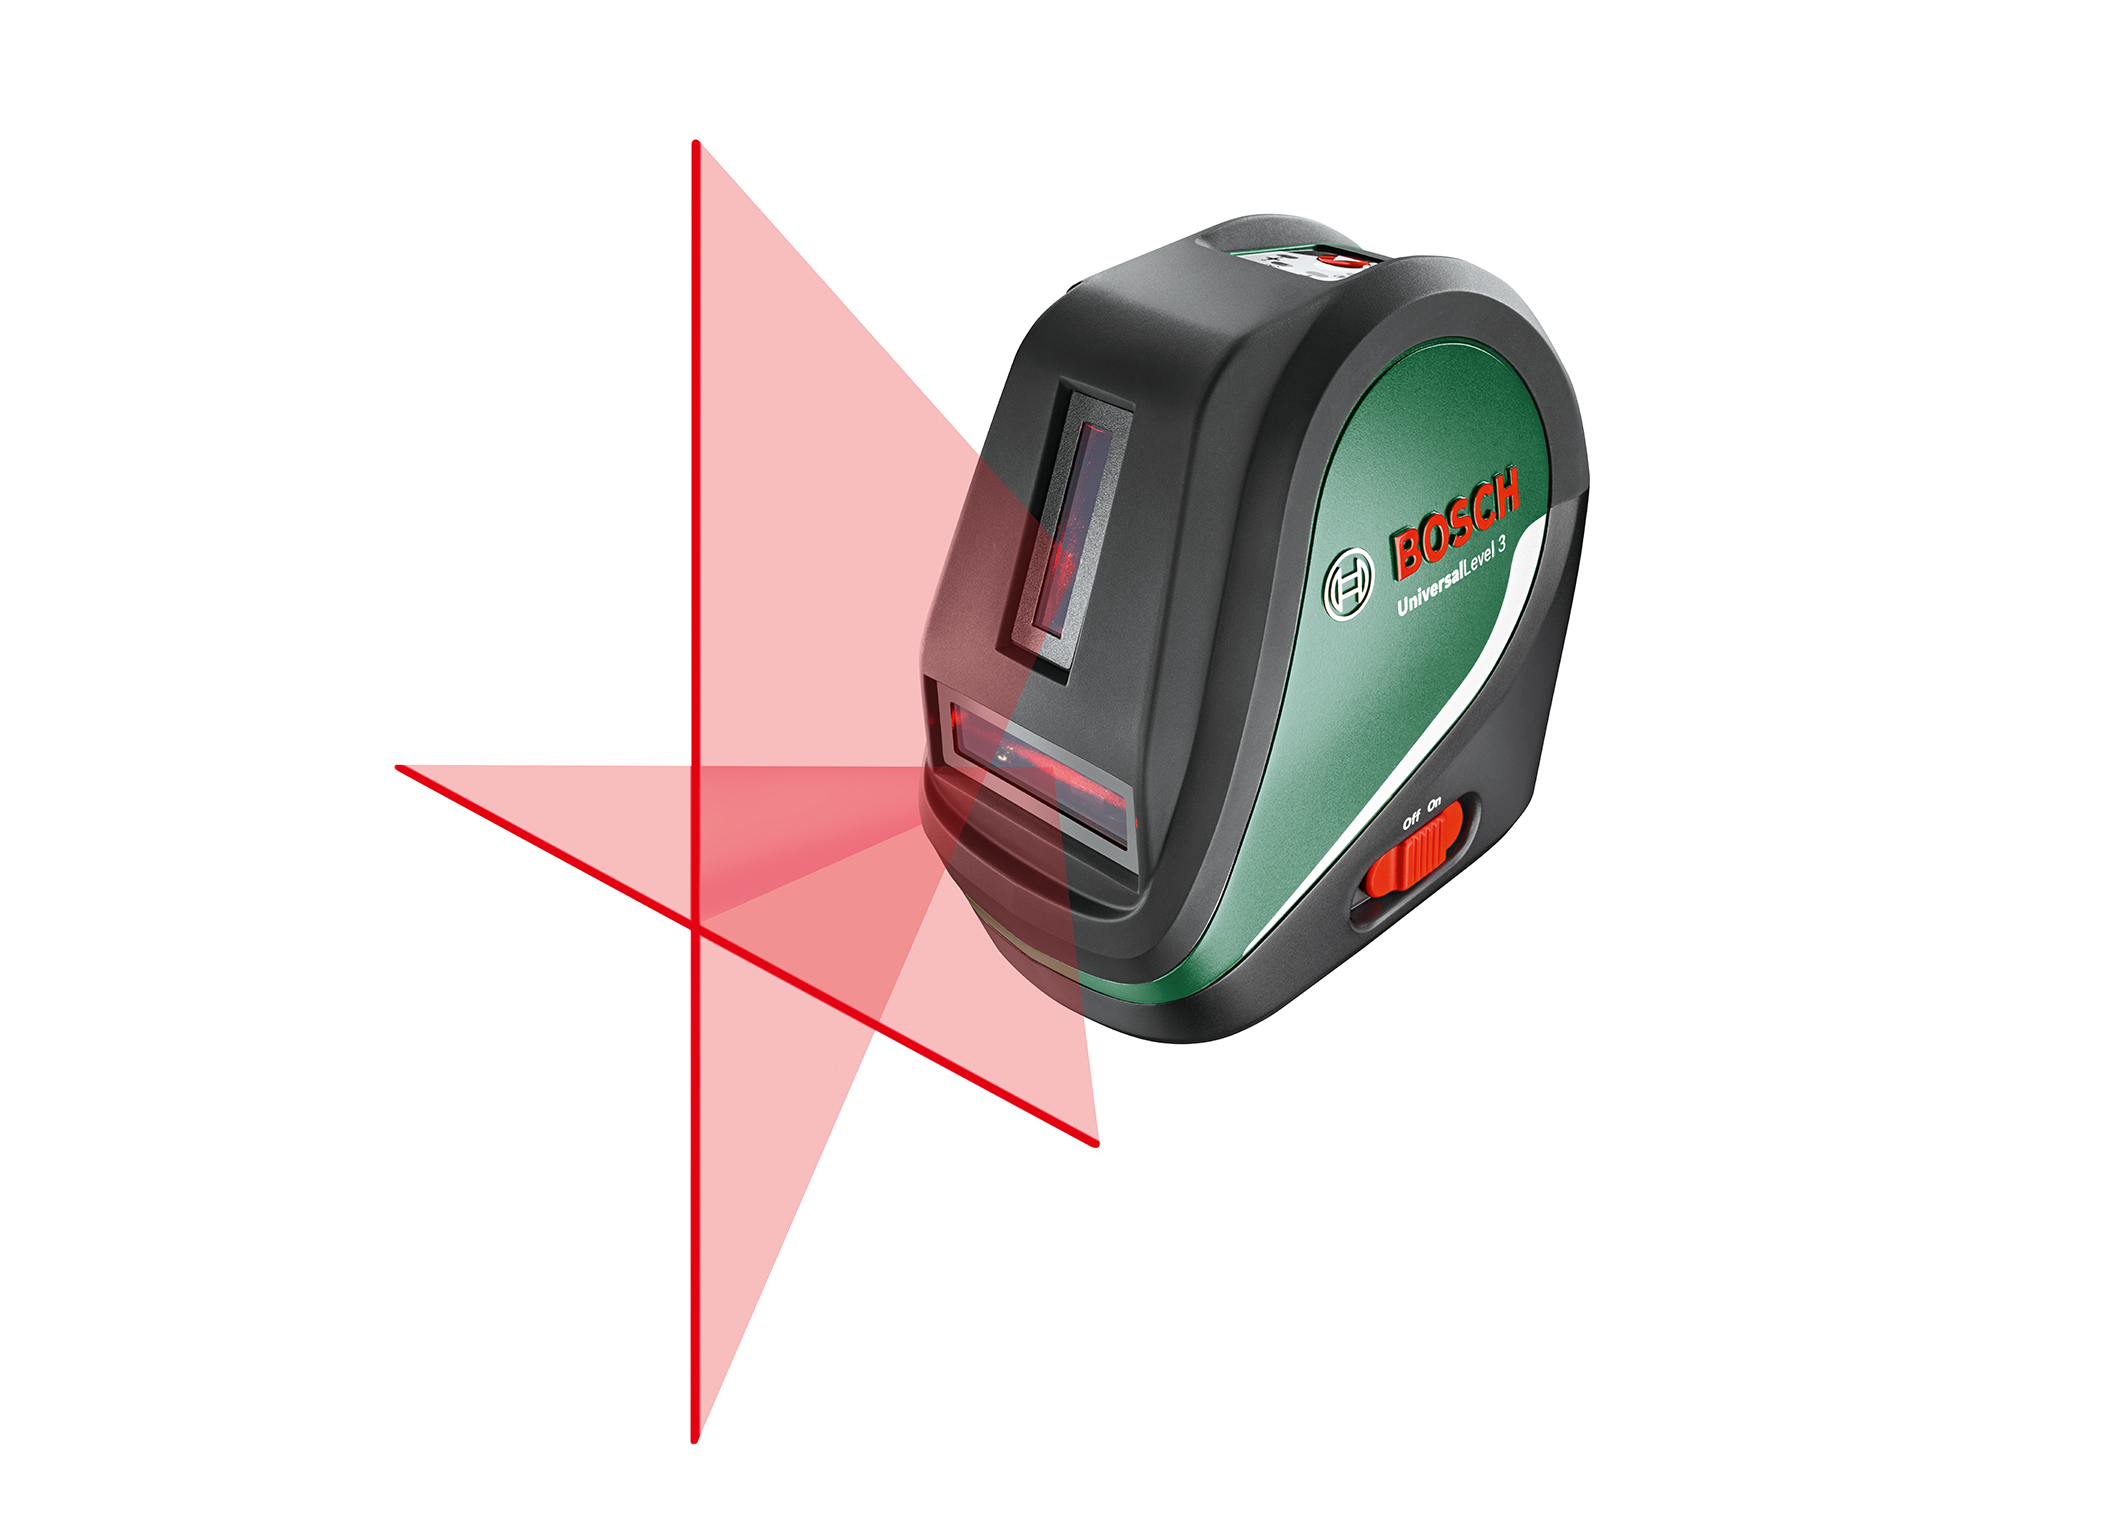 For challenging interior projects: Bosch UniversalLevel 3 cross line laser with second vertical laser line 